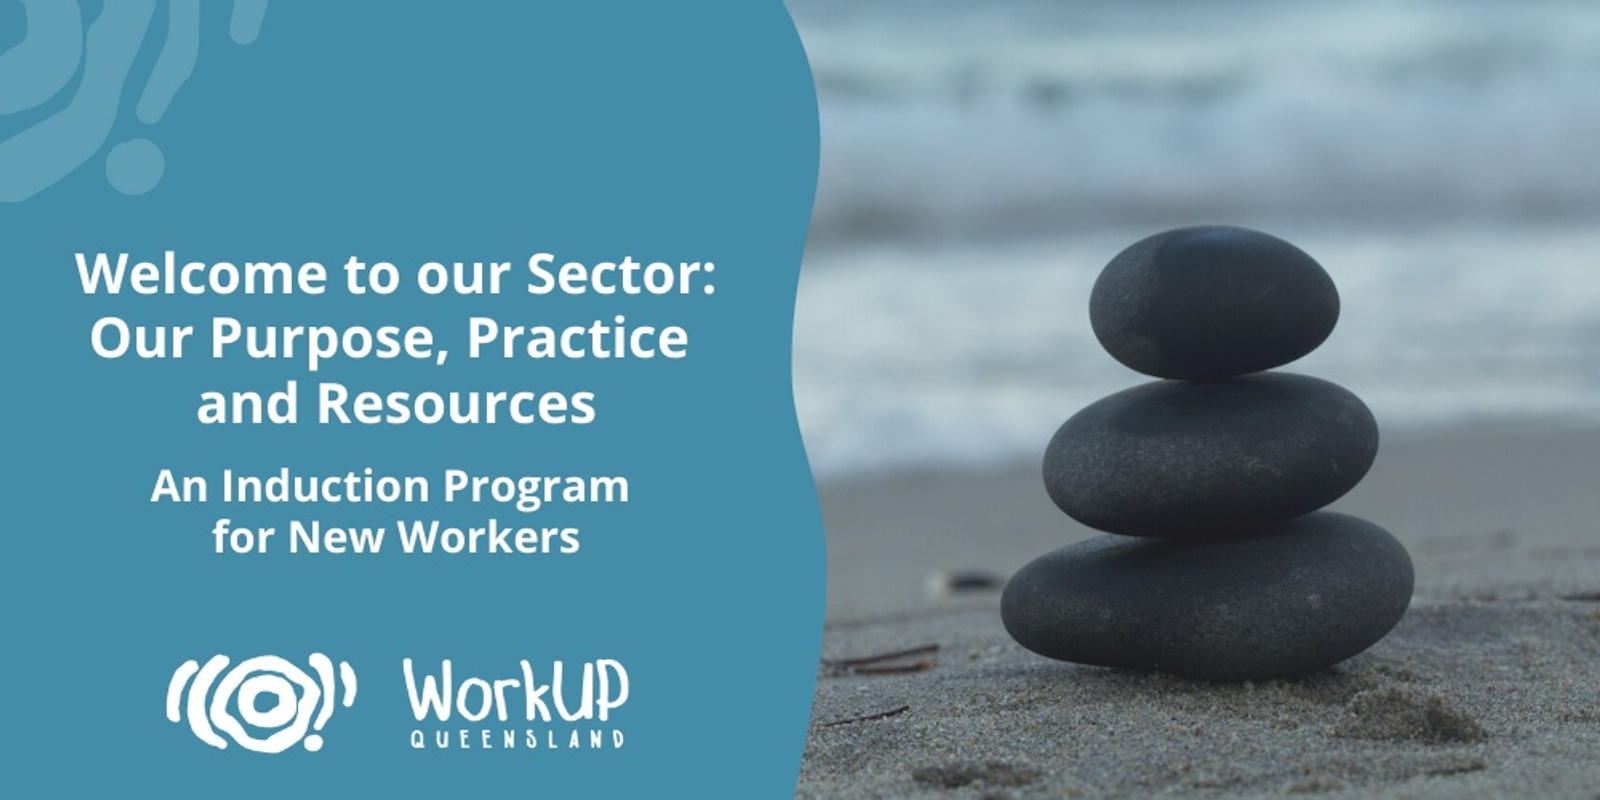 Welcome to our Sector: Our Purpose, Practice and Resources - An Induction Program for New Workers